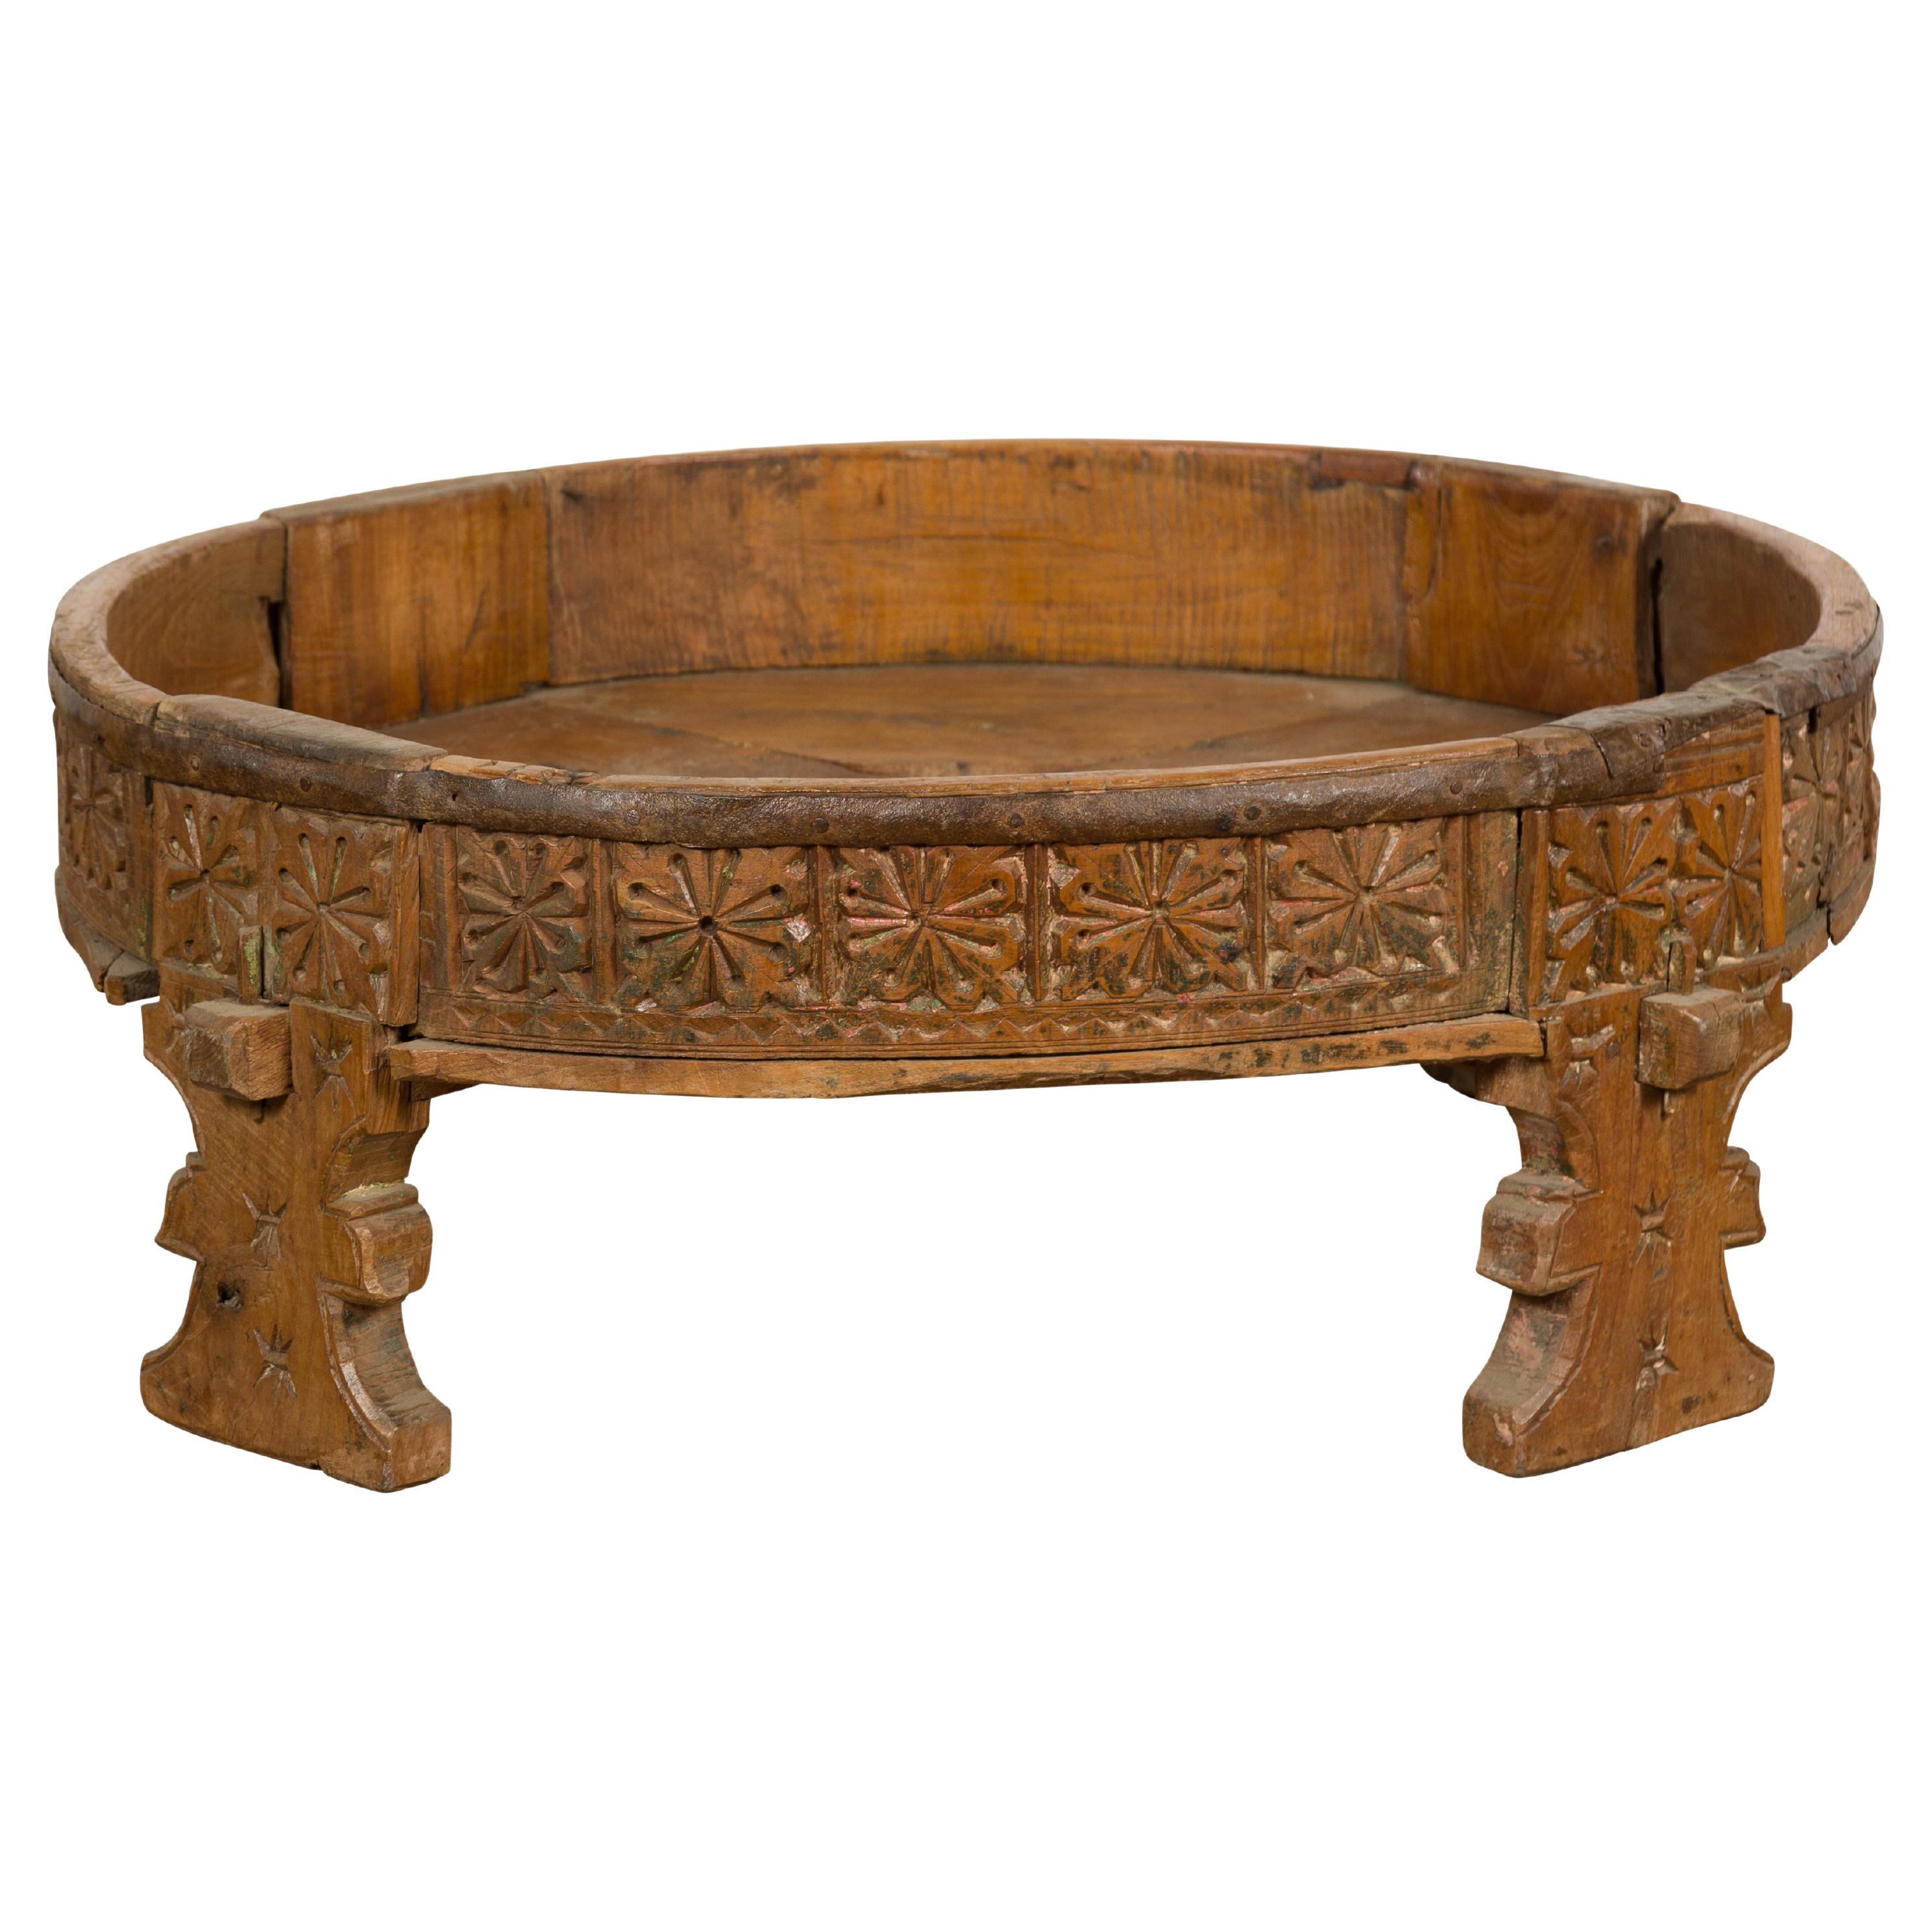 Indian Tribal 1920s Teak Chakki Grinding Table with Geometric Hand-Carved Motifs